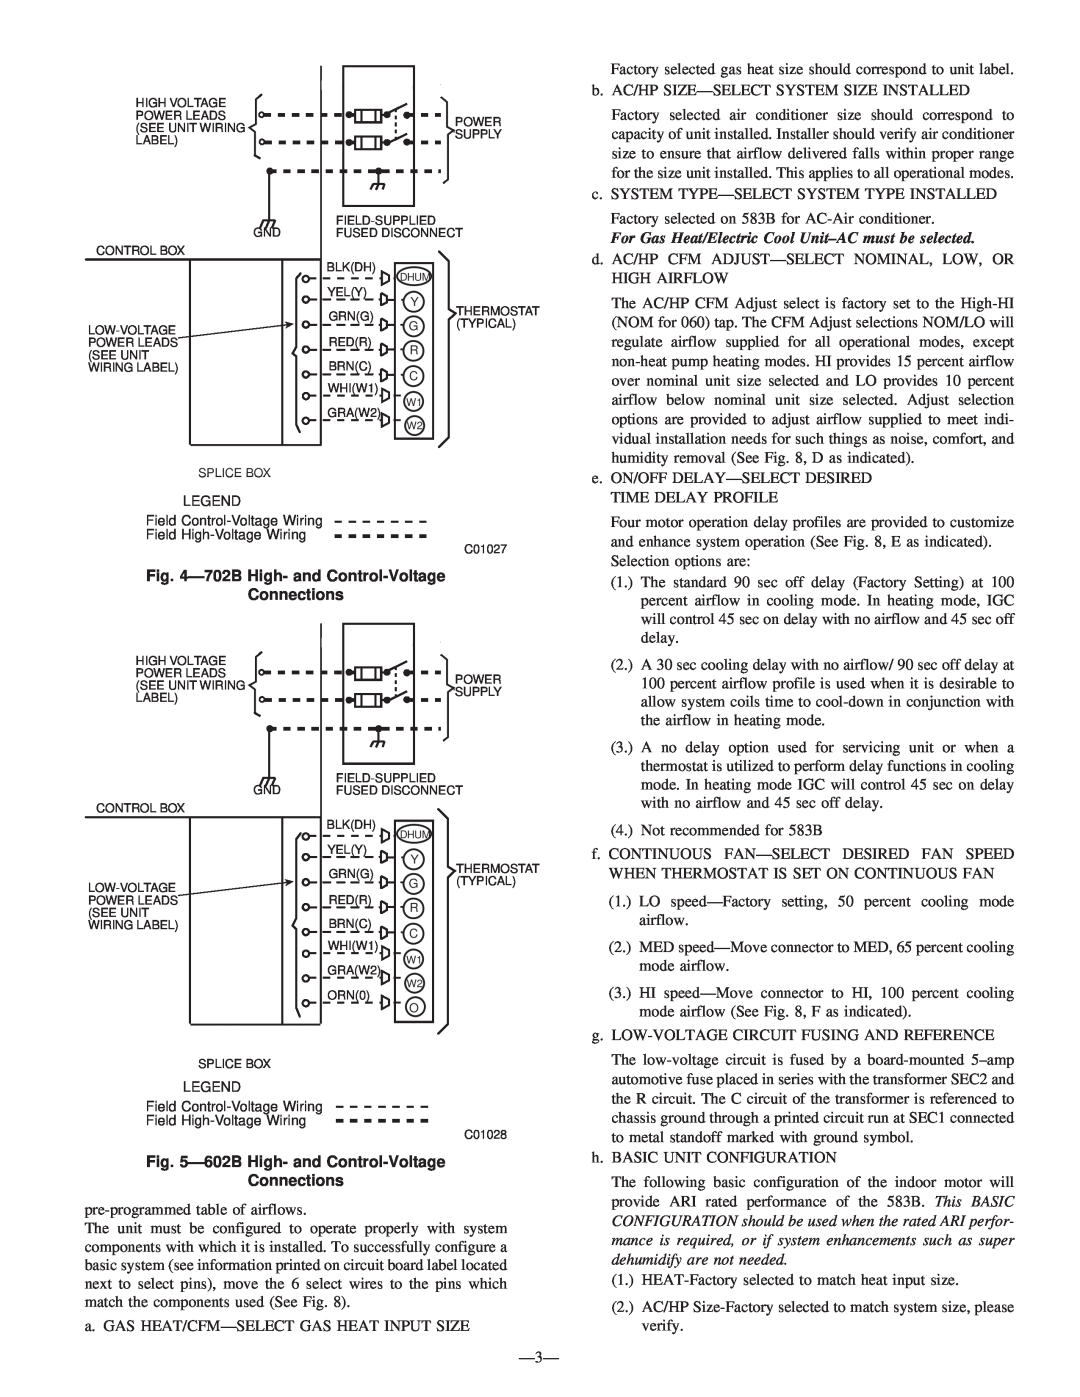 Bryant 602B, 583B, 683B For Gas Heat/Electric Cool Unit±AC must be selected, Ð702B High- and Control-Voltage Connections 